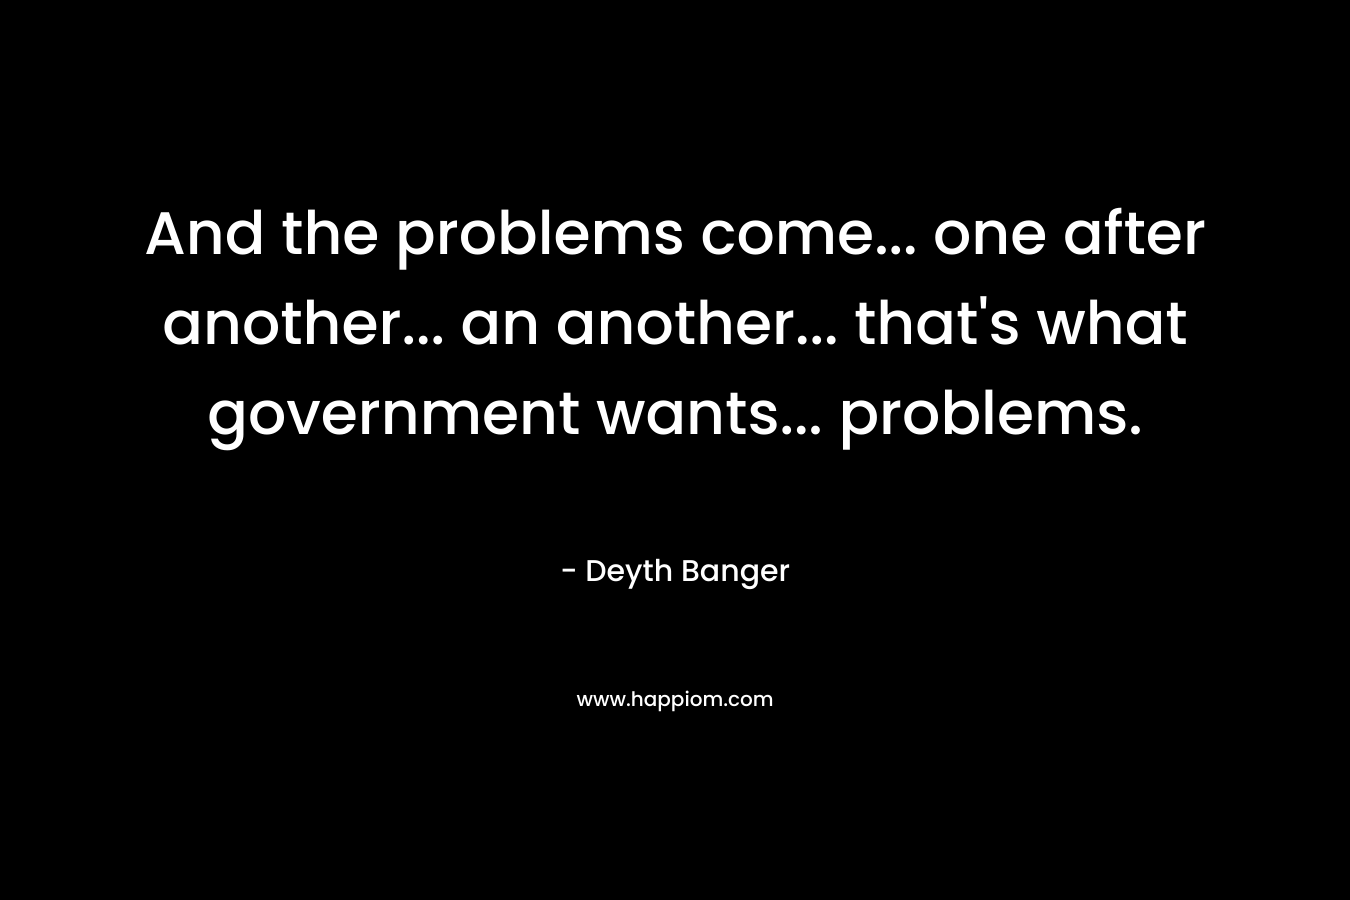 And the problems come... one after another... an another... that's what government wants... problems.